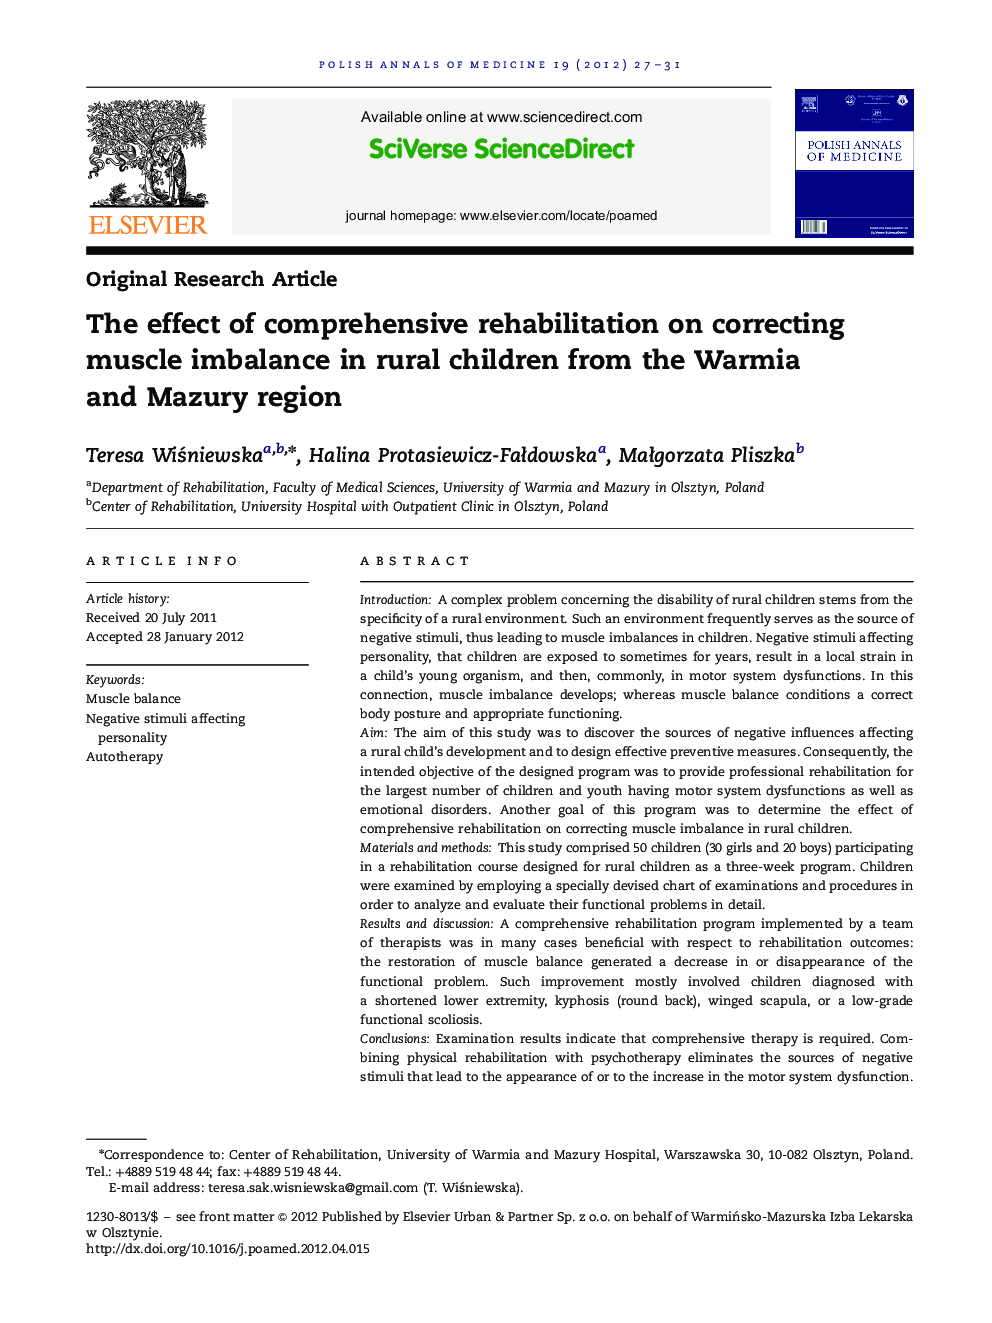 The effect of comprehensive rehabilitation on correcting muscle imbalance in rural children from the Warmia and Mazury region